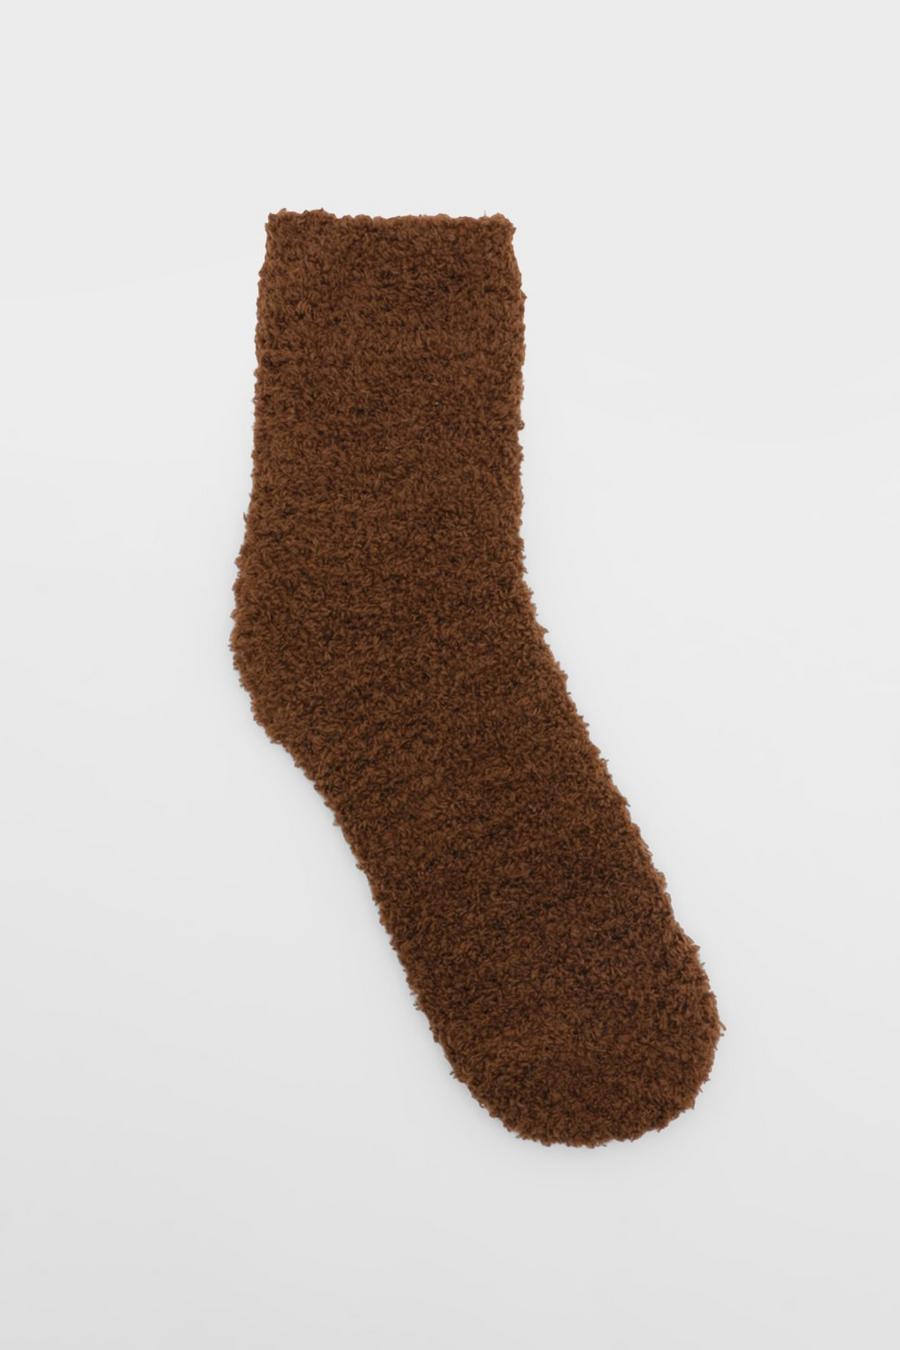 Chocolate brown Fluffy Bed Socks